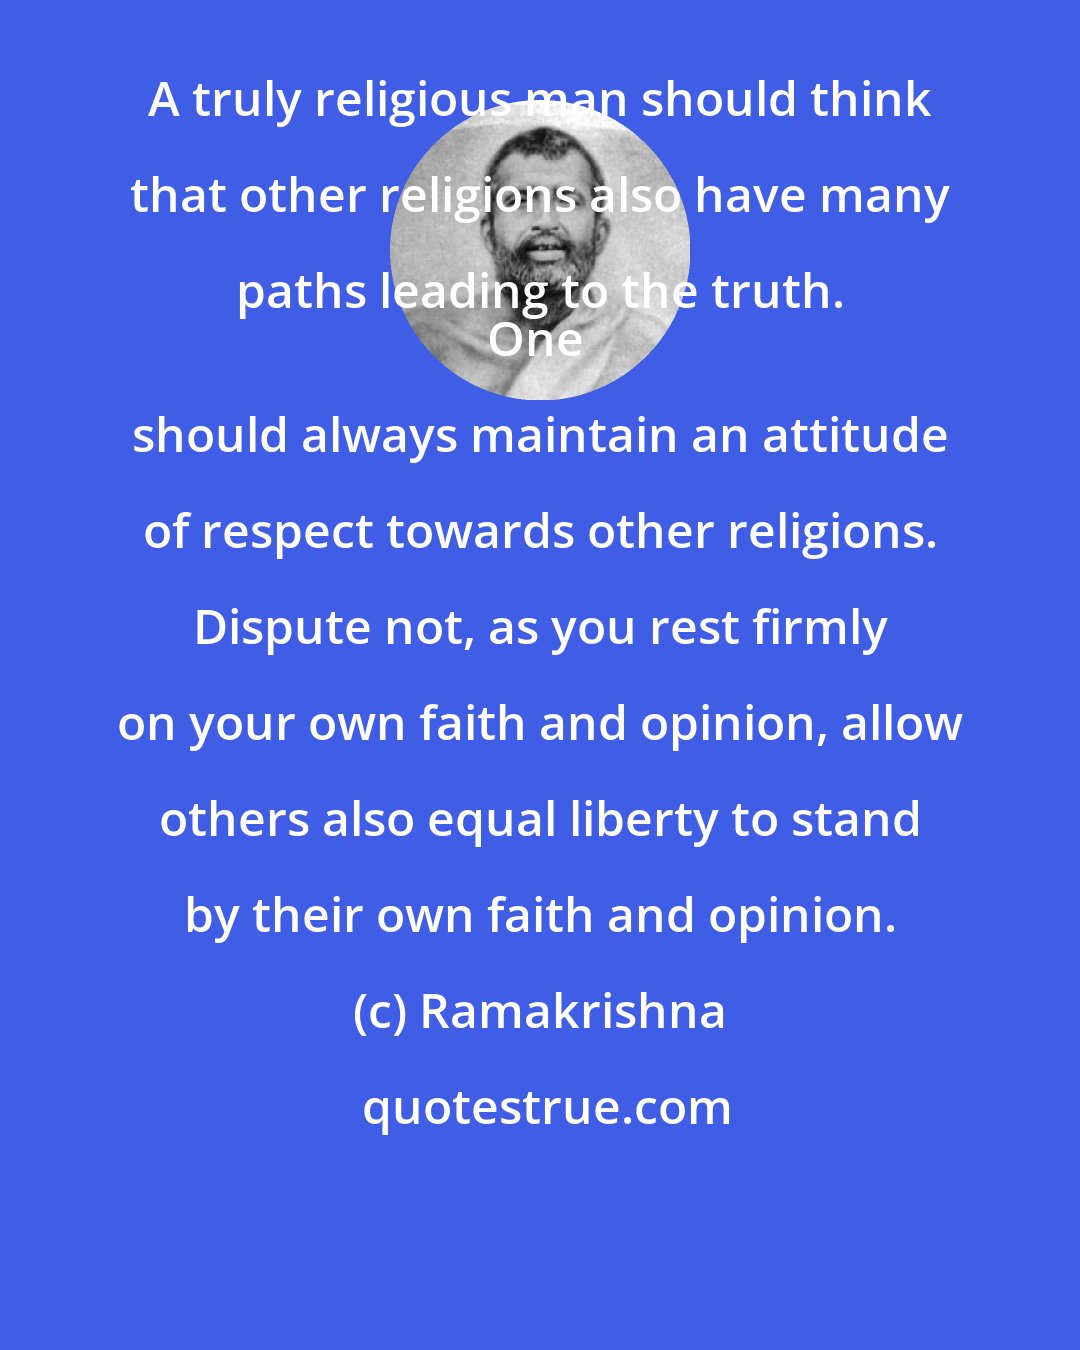 Ramakrishna: A truly religious man should think that other religions also have many paths leading to the truth. 
One should always maintain an attitude of respect towards other religions. Dispute not, as you rest firmly on your own faith and opinion, allow others also equal liberty to stand by their own faith and opinion.